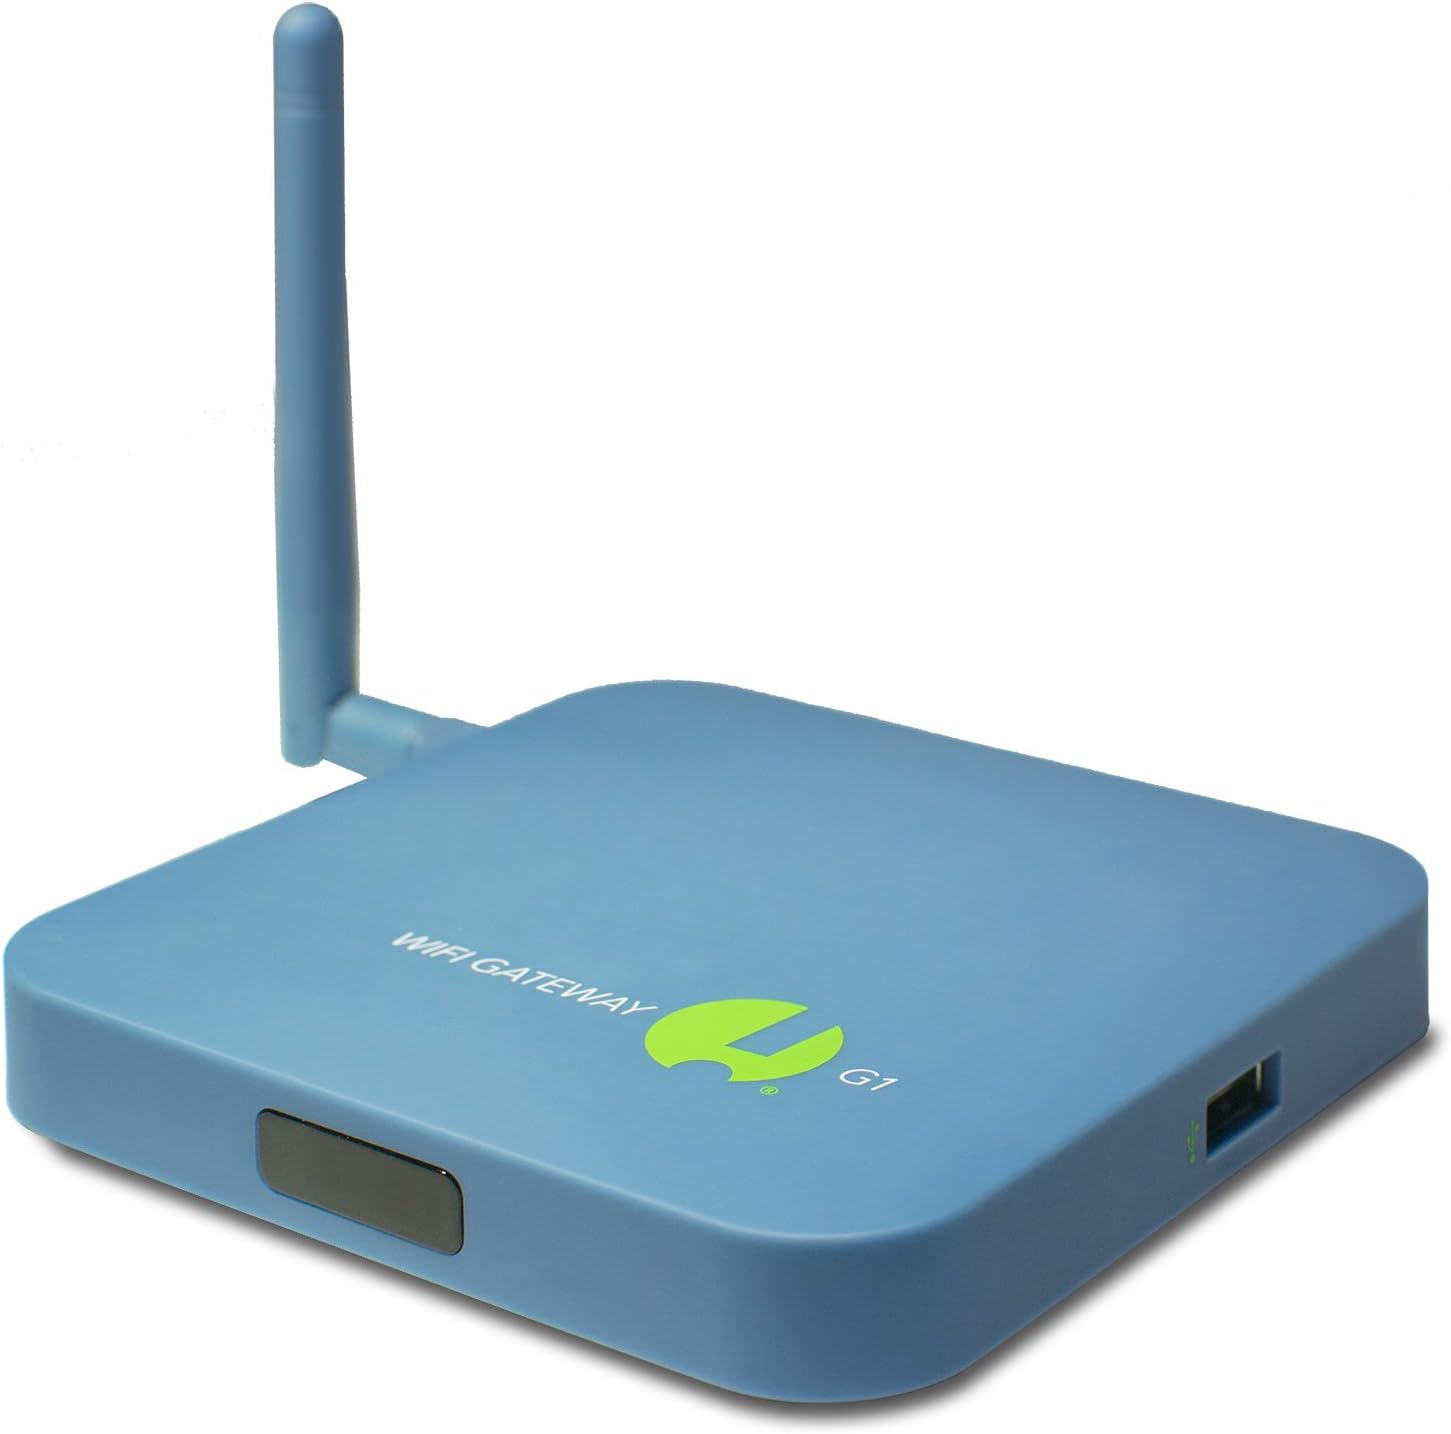 SensorPush G1 WiFi/Ethernet Gateway. Receive Data/Alerts from Anywhere via Internet. No Monthly Fee. Unlimited History. Developed/Supported/Hosted in USA. iPhone/Android App/Web Dashboard/Alexa